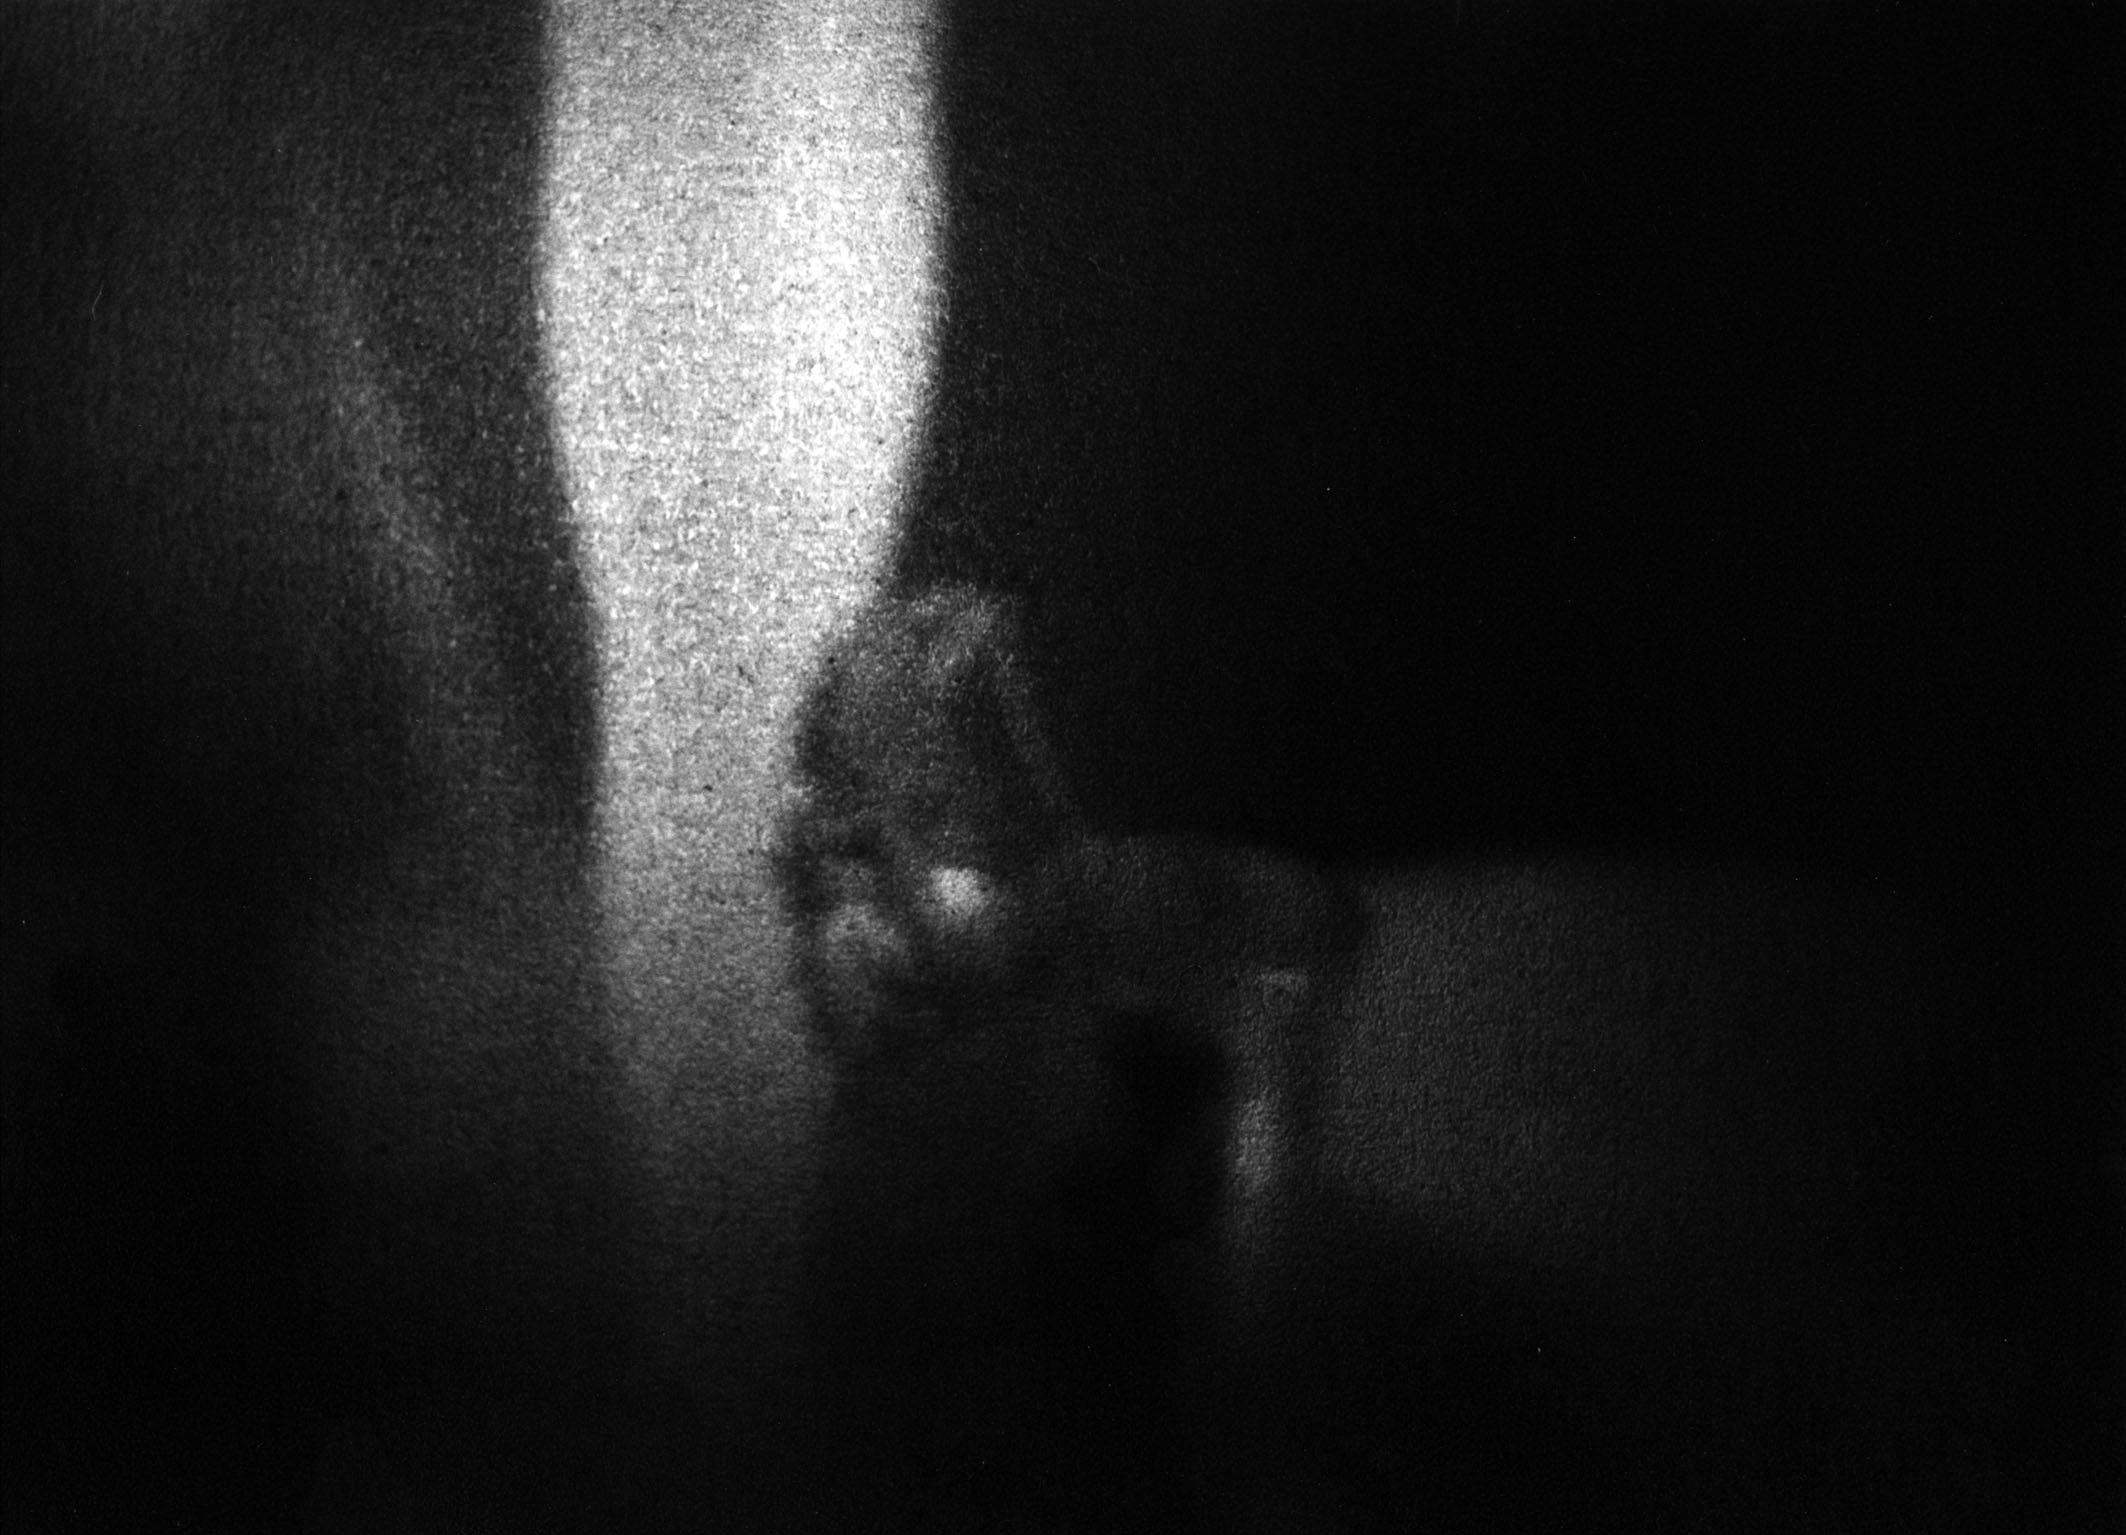 Camera Obscura 37, 1996
Portriga baryt Agfa (black-white) holorbromesilver paper
18,0 x 24,0 cm (photograph),
36,4 x 29,4 cm (sheet_frame)
Edition of 5